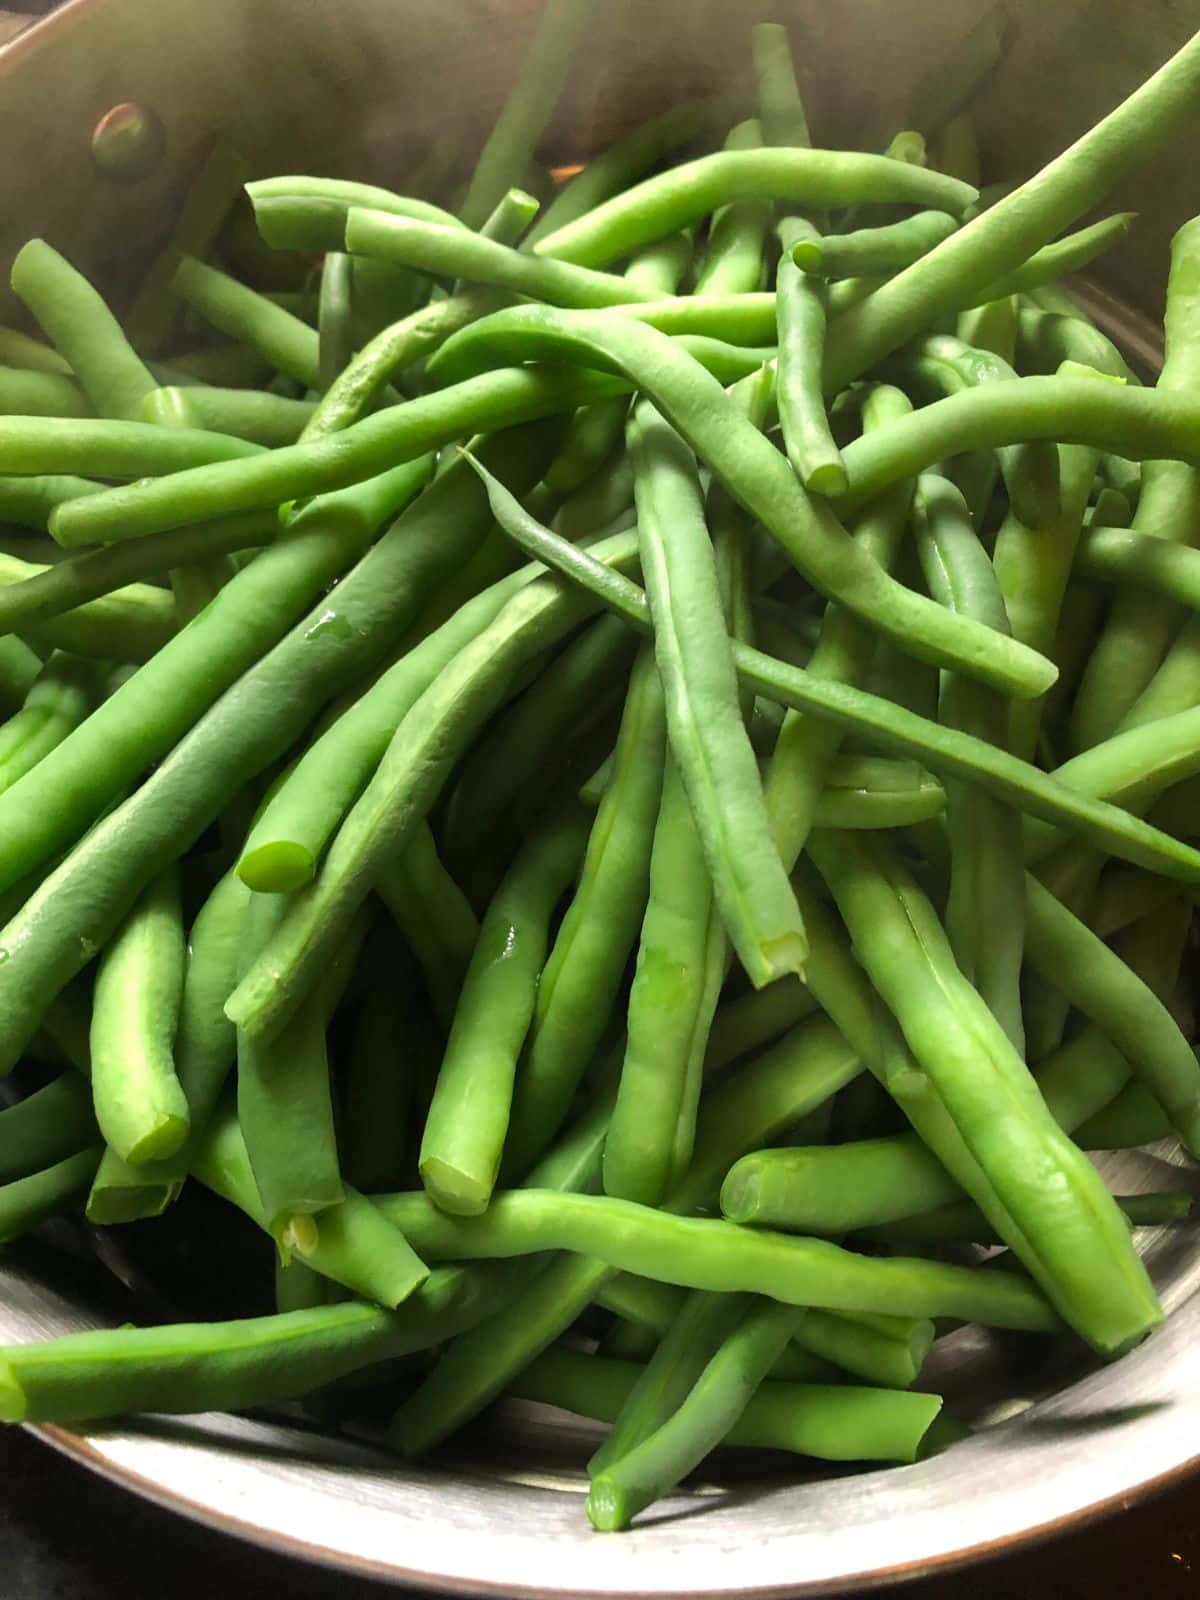 Green beans being prepped for freezing